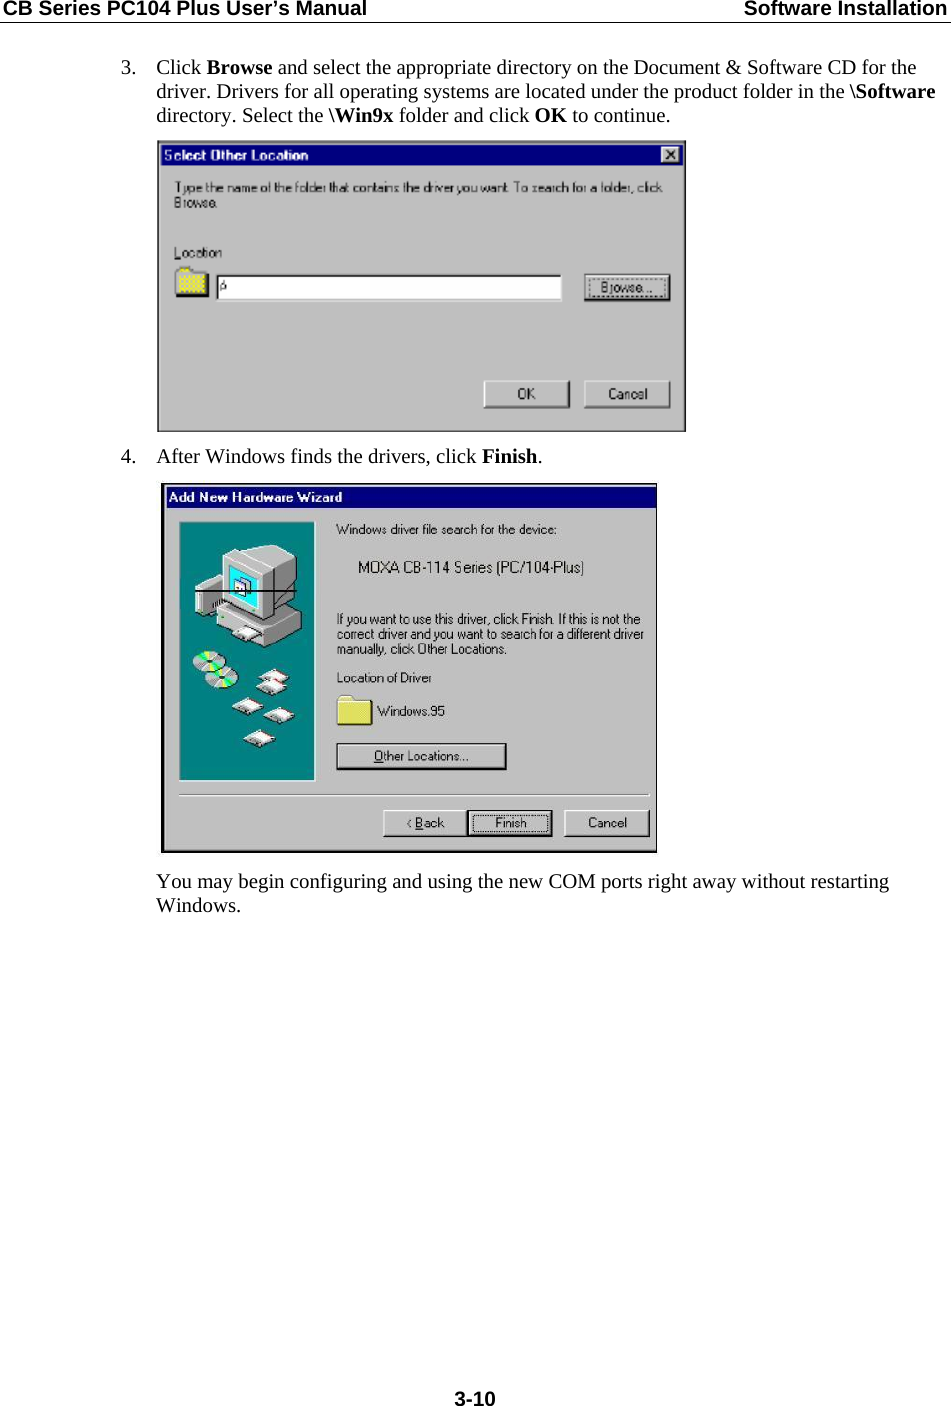 CB Series PC104 Plus User’s Manual  Software Installation 3. Click Browse and select the appropriate directory on the Document &amp; Software CD for the driver. Drivers for all operating systems are located under the product folder in the \Software directory. Select the \Win9x folder and click OK to continue.  4. After Windows finds the drivers, click Finish.  You may begin configuring and using the new COM ports right away without restarting Windows.  3-10